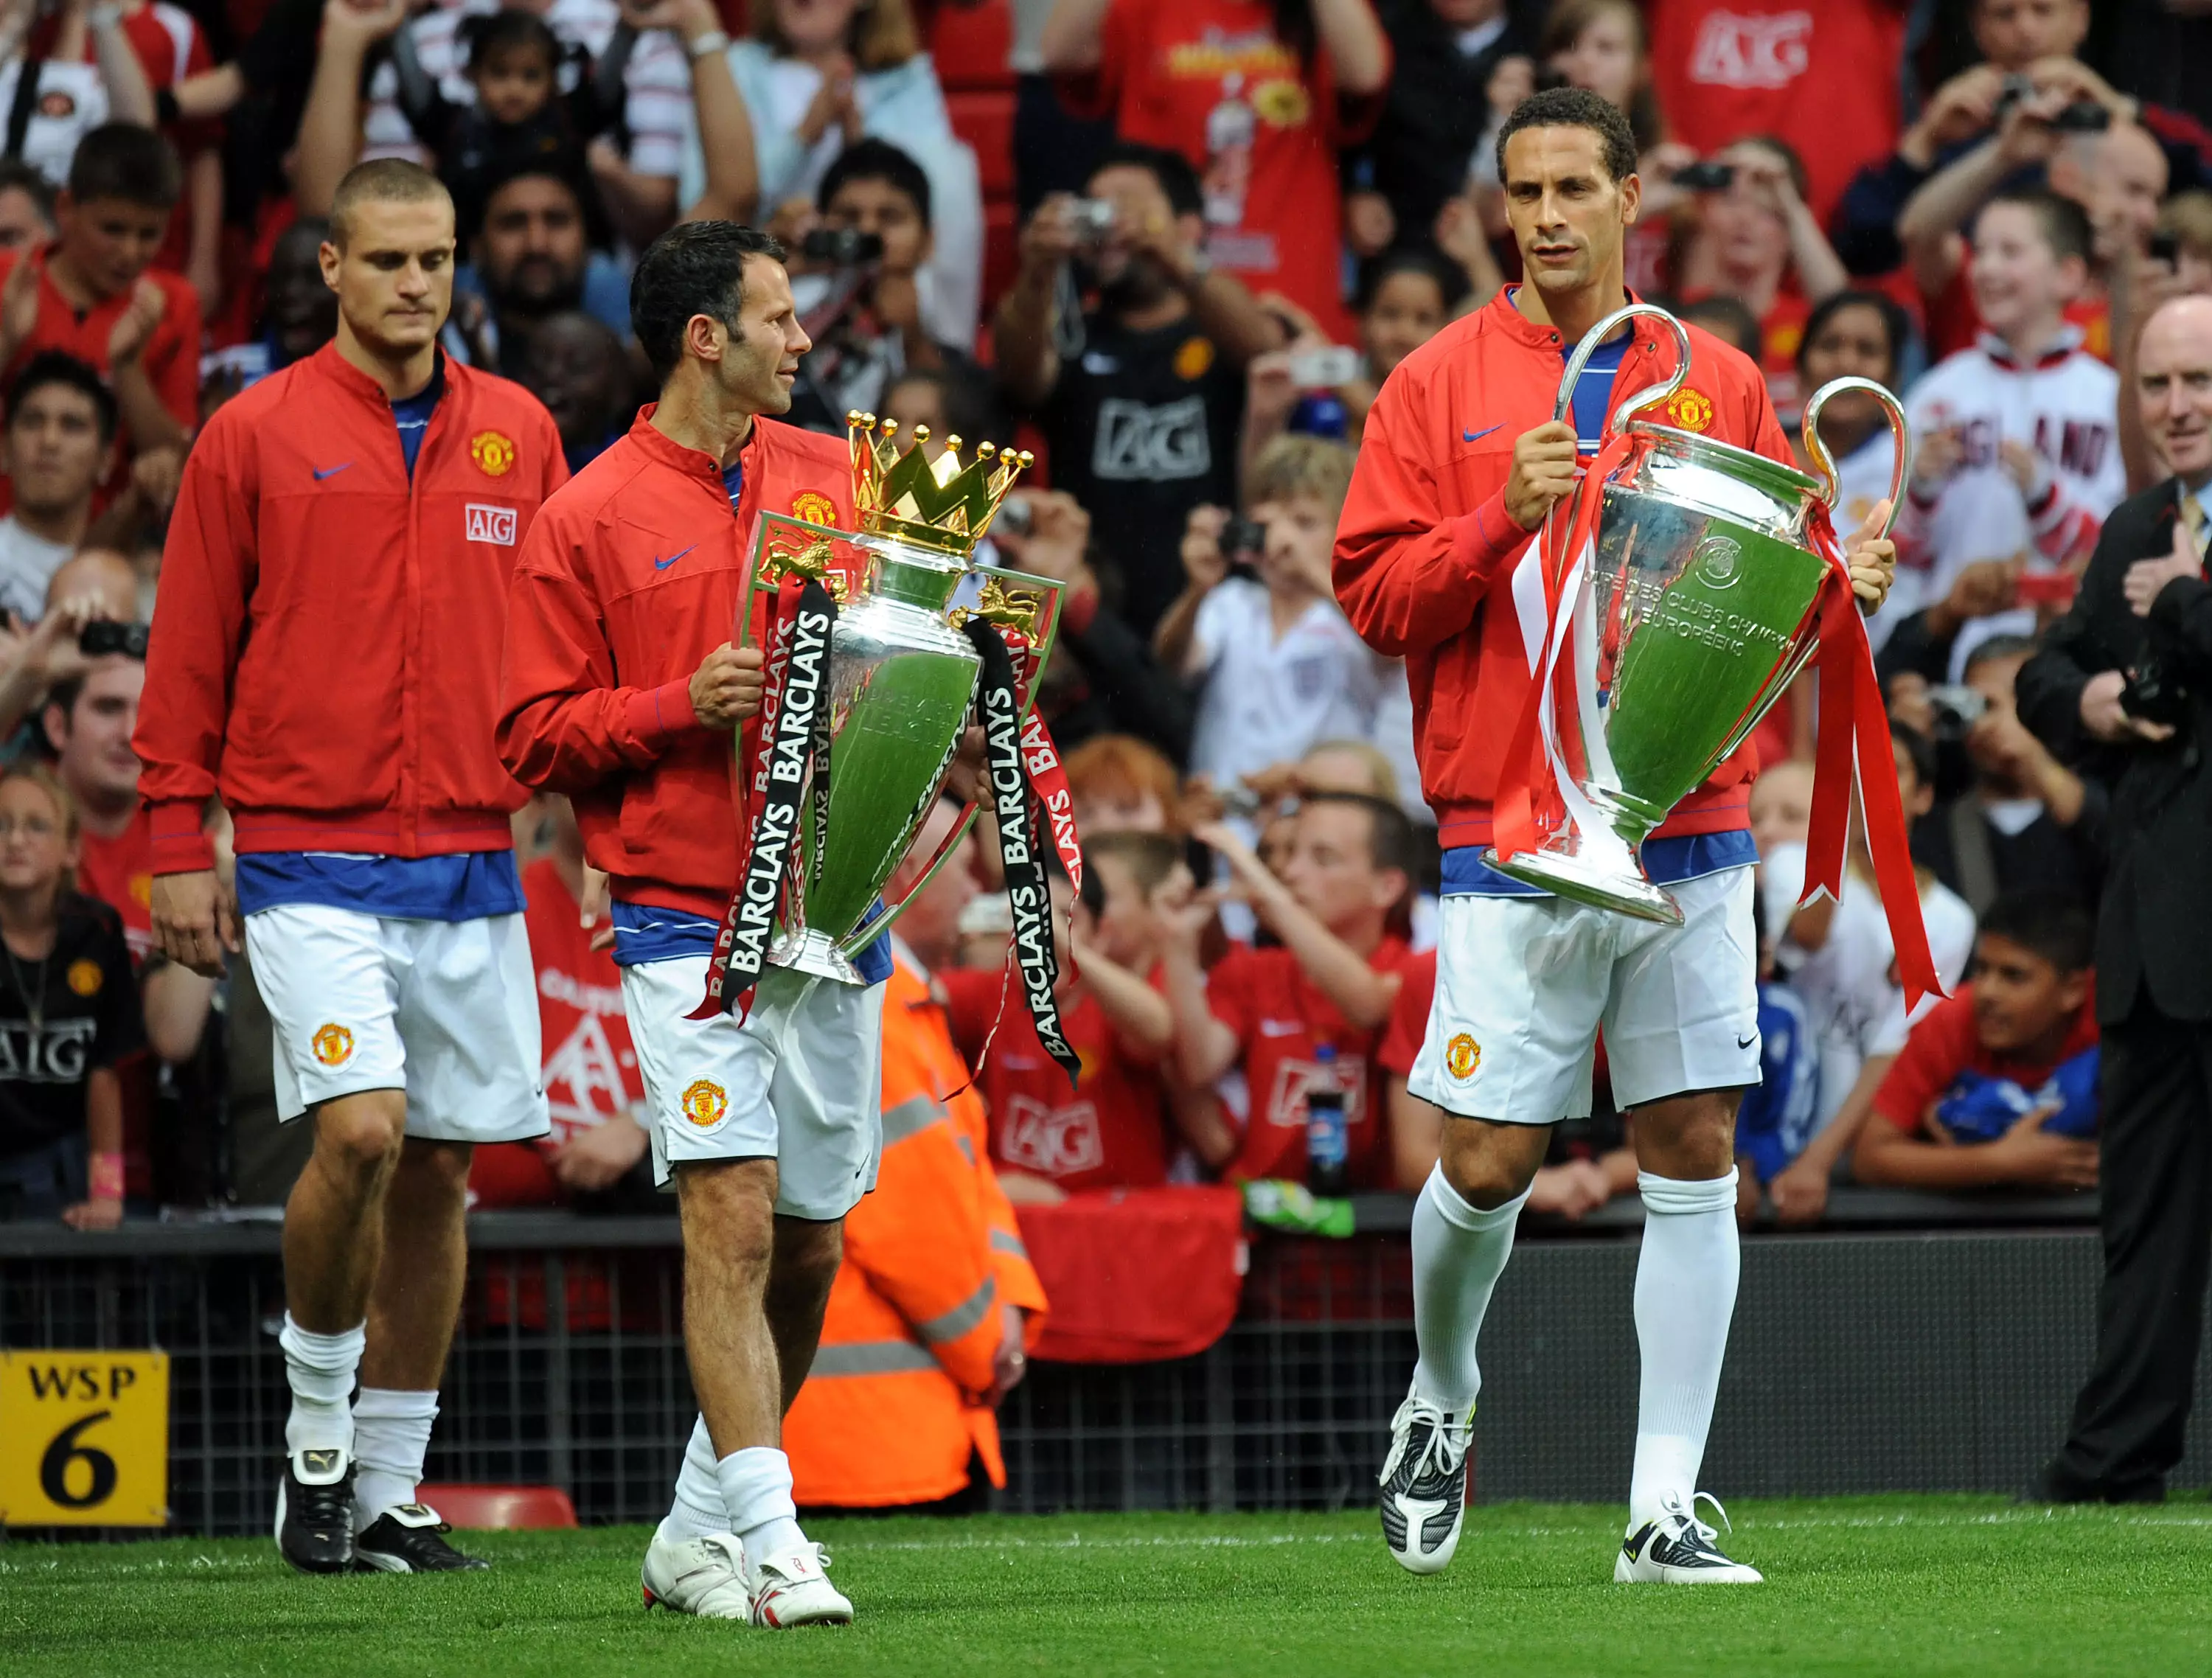 Giggs only won the Champions League twice. Image: PA Images